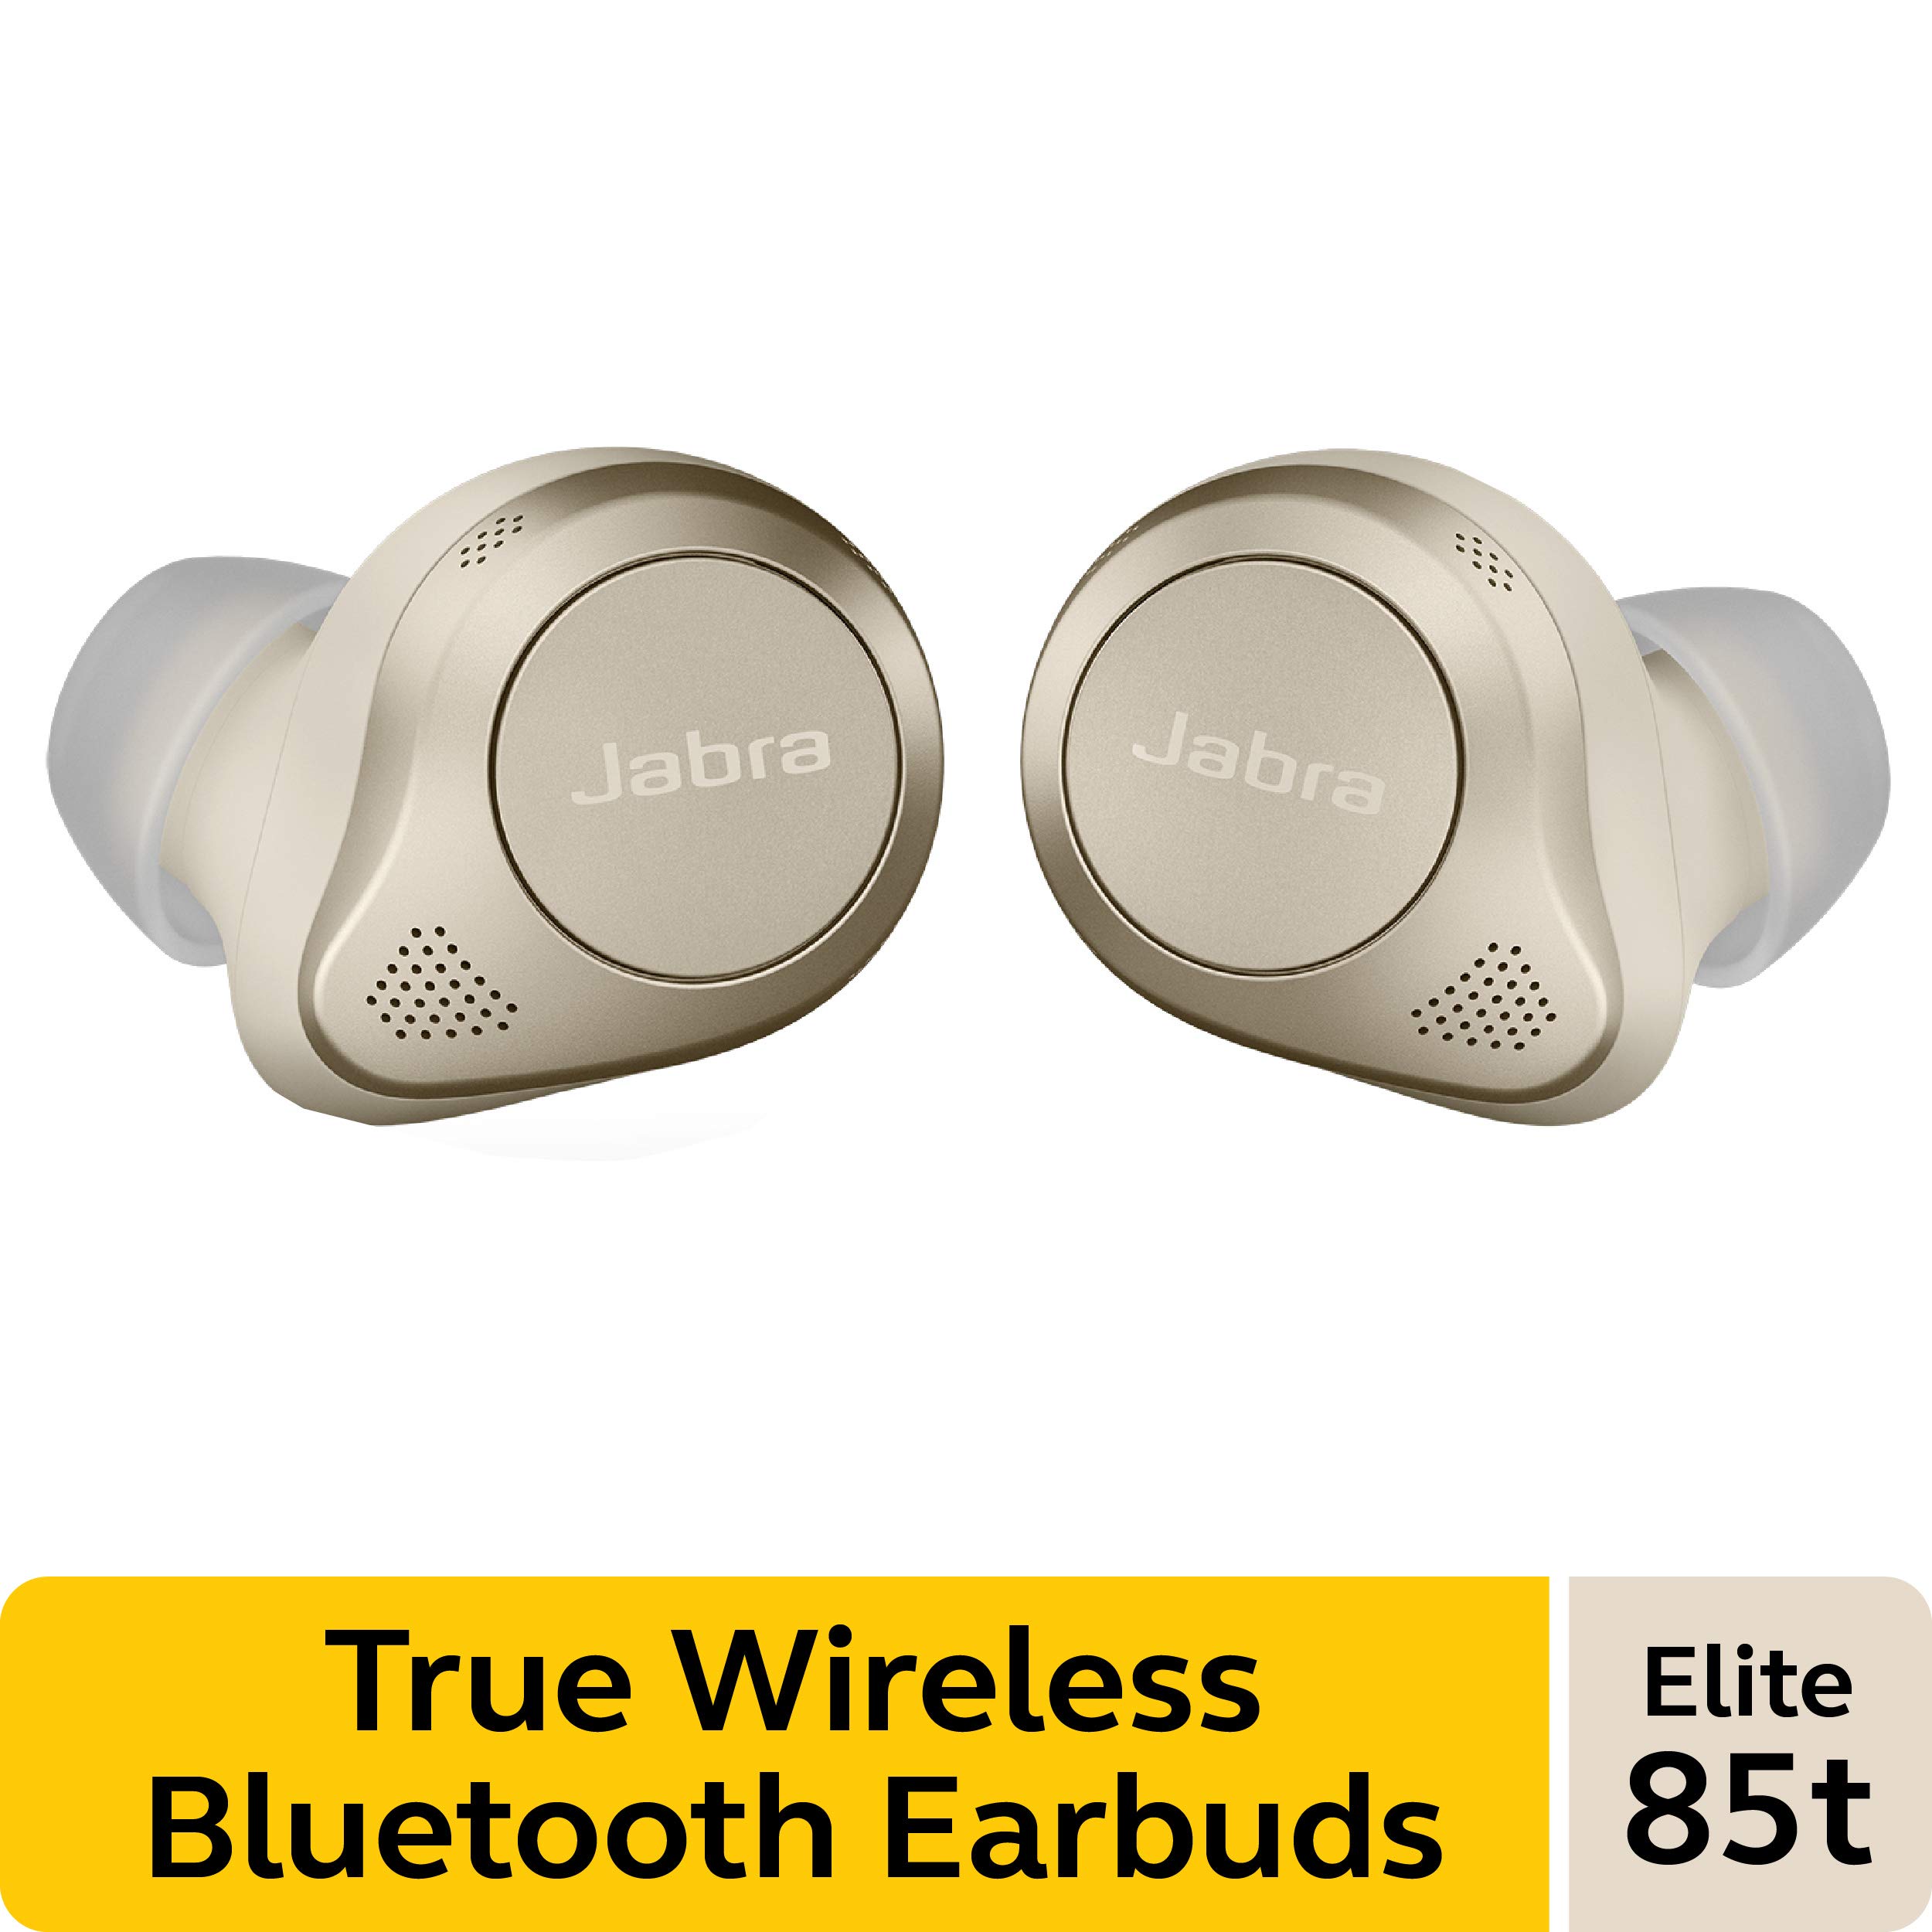 Jabra Elite 85t True Wireless Bluetooth Earbuds, Gold Beige – Advanced Noise-Cancelling Earbuds with Charging Case for Calls & Music – Wireless Earbuds with Superior Sound & Premium Comfort, 12